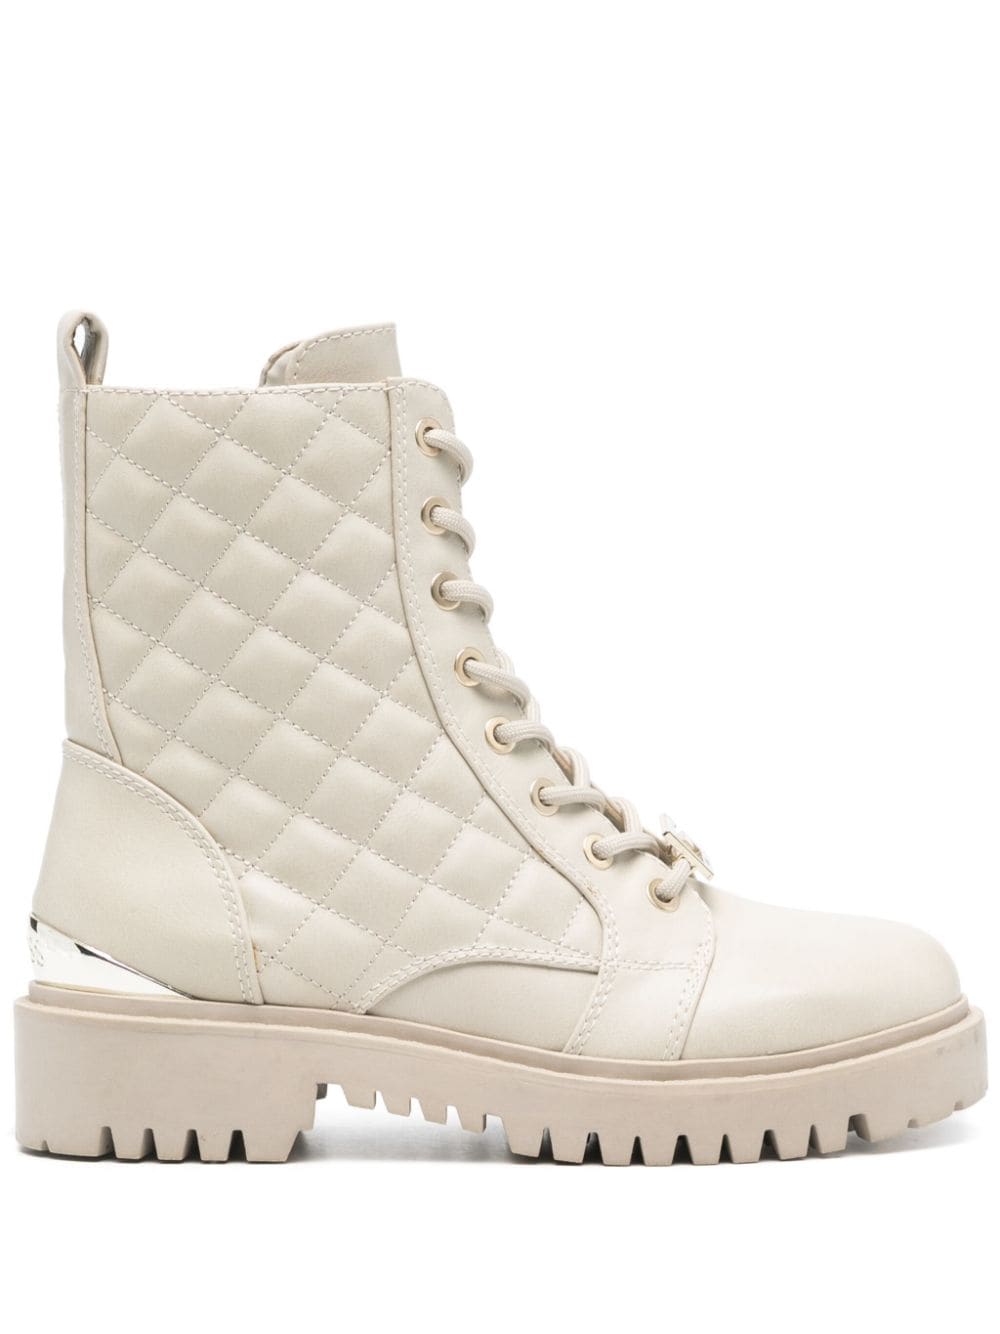 GUESS USA diamond-quilted ankle boots - Neutrals von GUESS USA